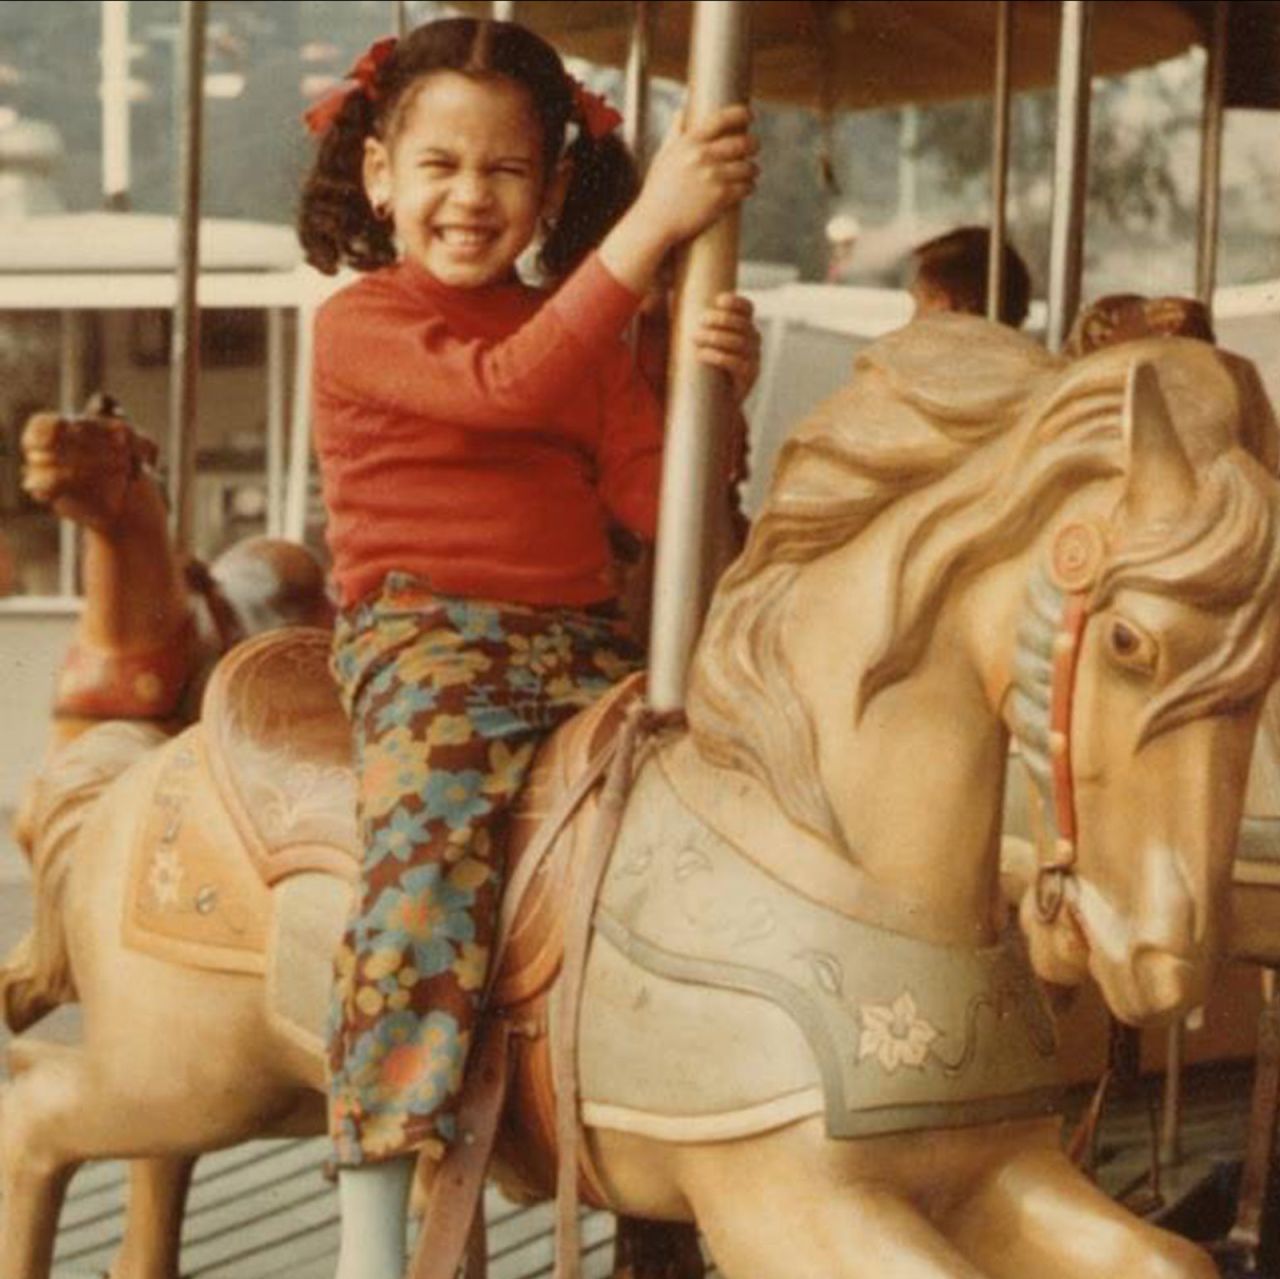 Harris rides a carousel in this old photo <a href="https://www.instagram.com/p/3g64_Qrv3_/" target="_blank" target="_blank">she posted to social media in 2015.</a> Her name, Kamala, comes from the Sanskrit word for the lotus flower. Harris is the daughter of Jamaican and Indian immigrants and grew up attending both a Baptist church and a Hindu temple.